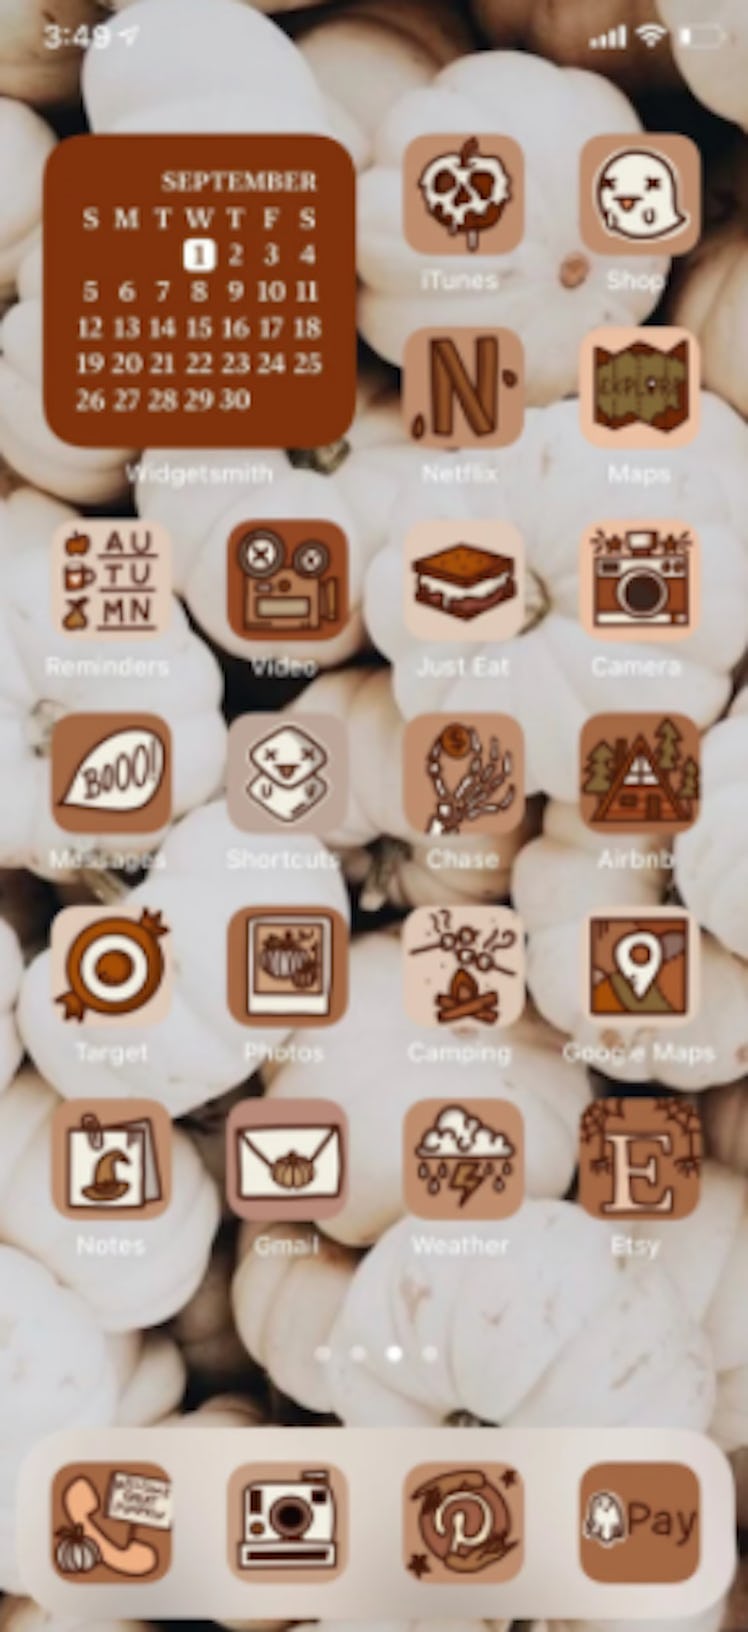 These new Halloween iOS Home Screen iPhone ideas include spooky fall vibes.